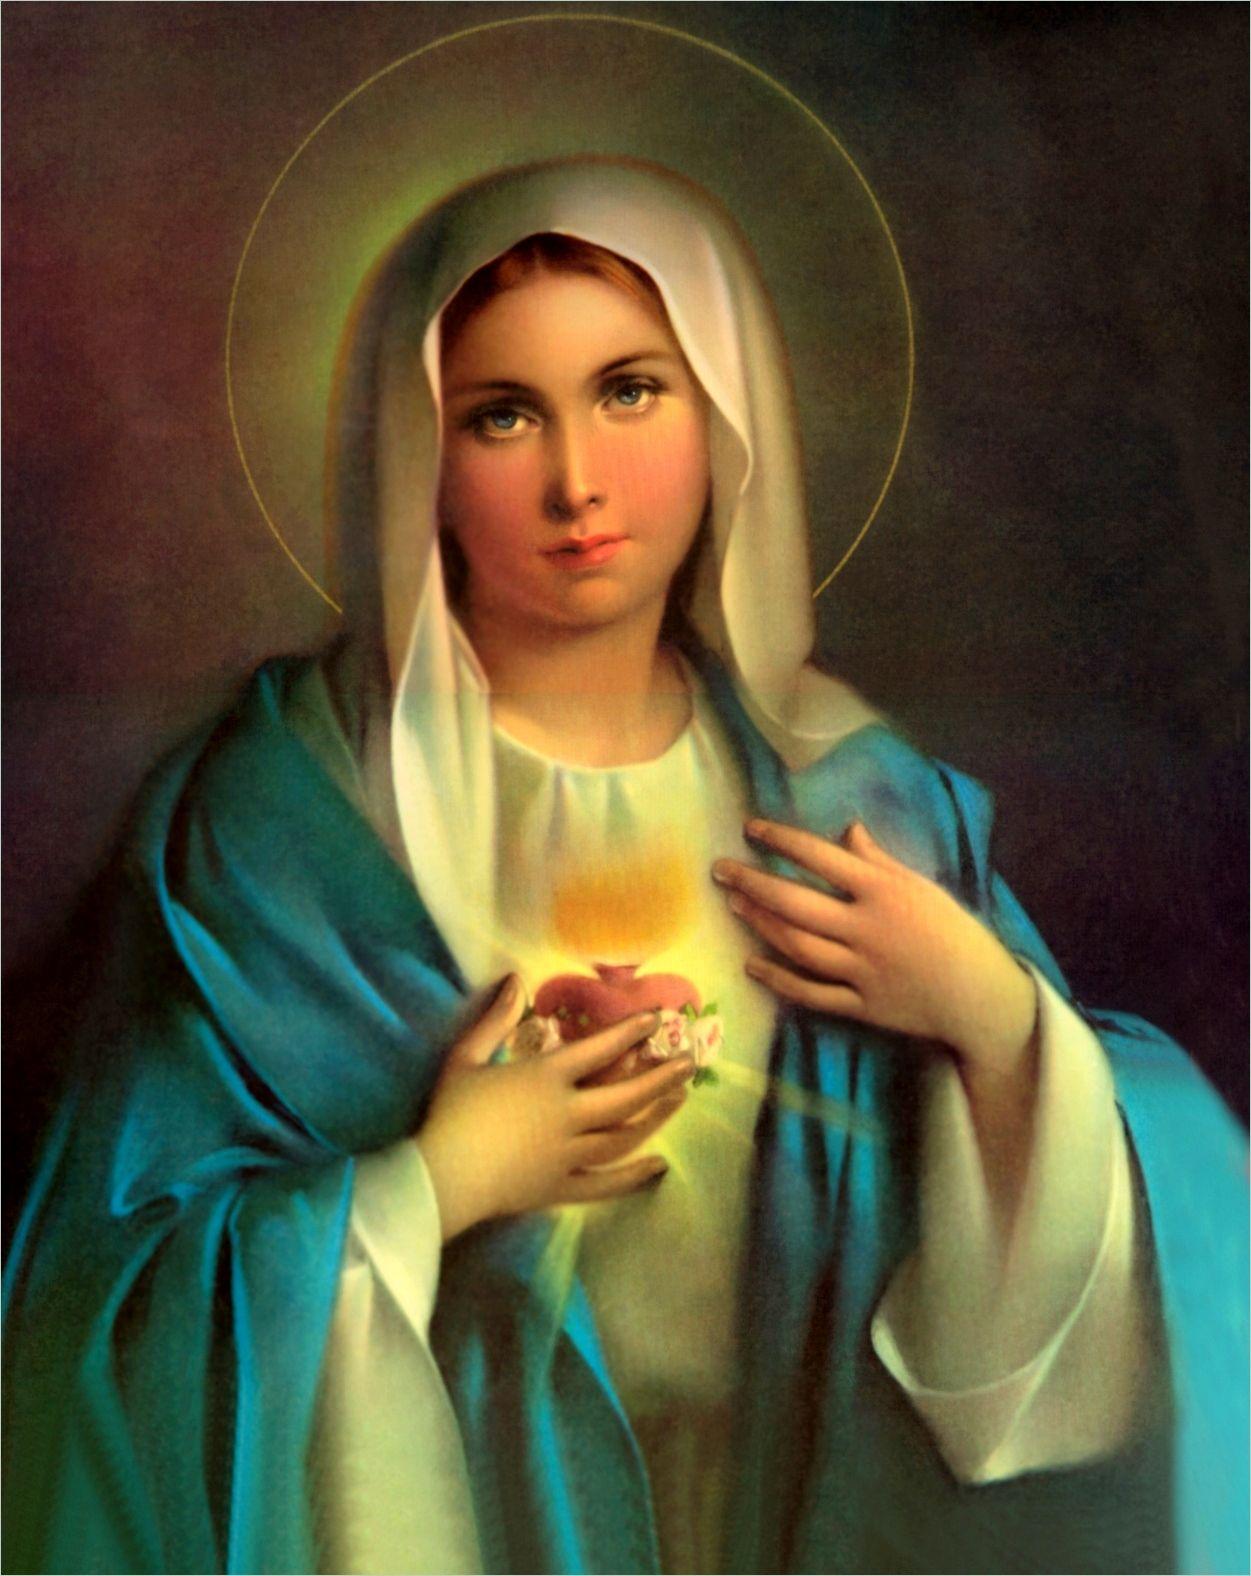 The Small Town Catholic: The Immaculate Heart of Mary